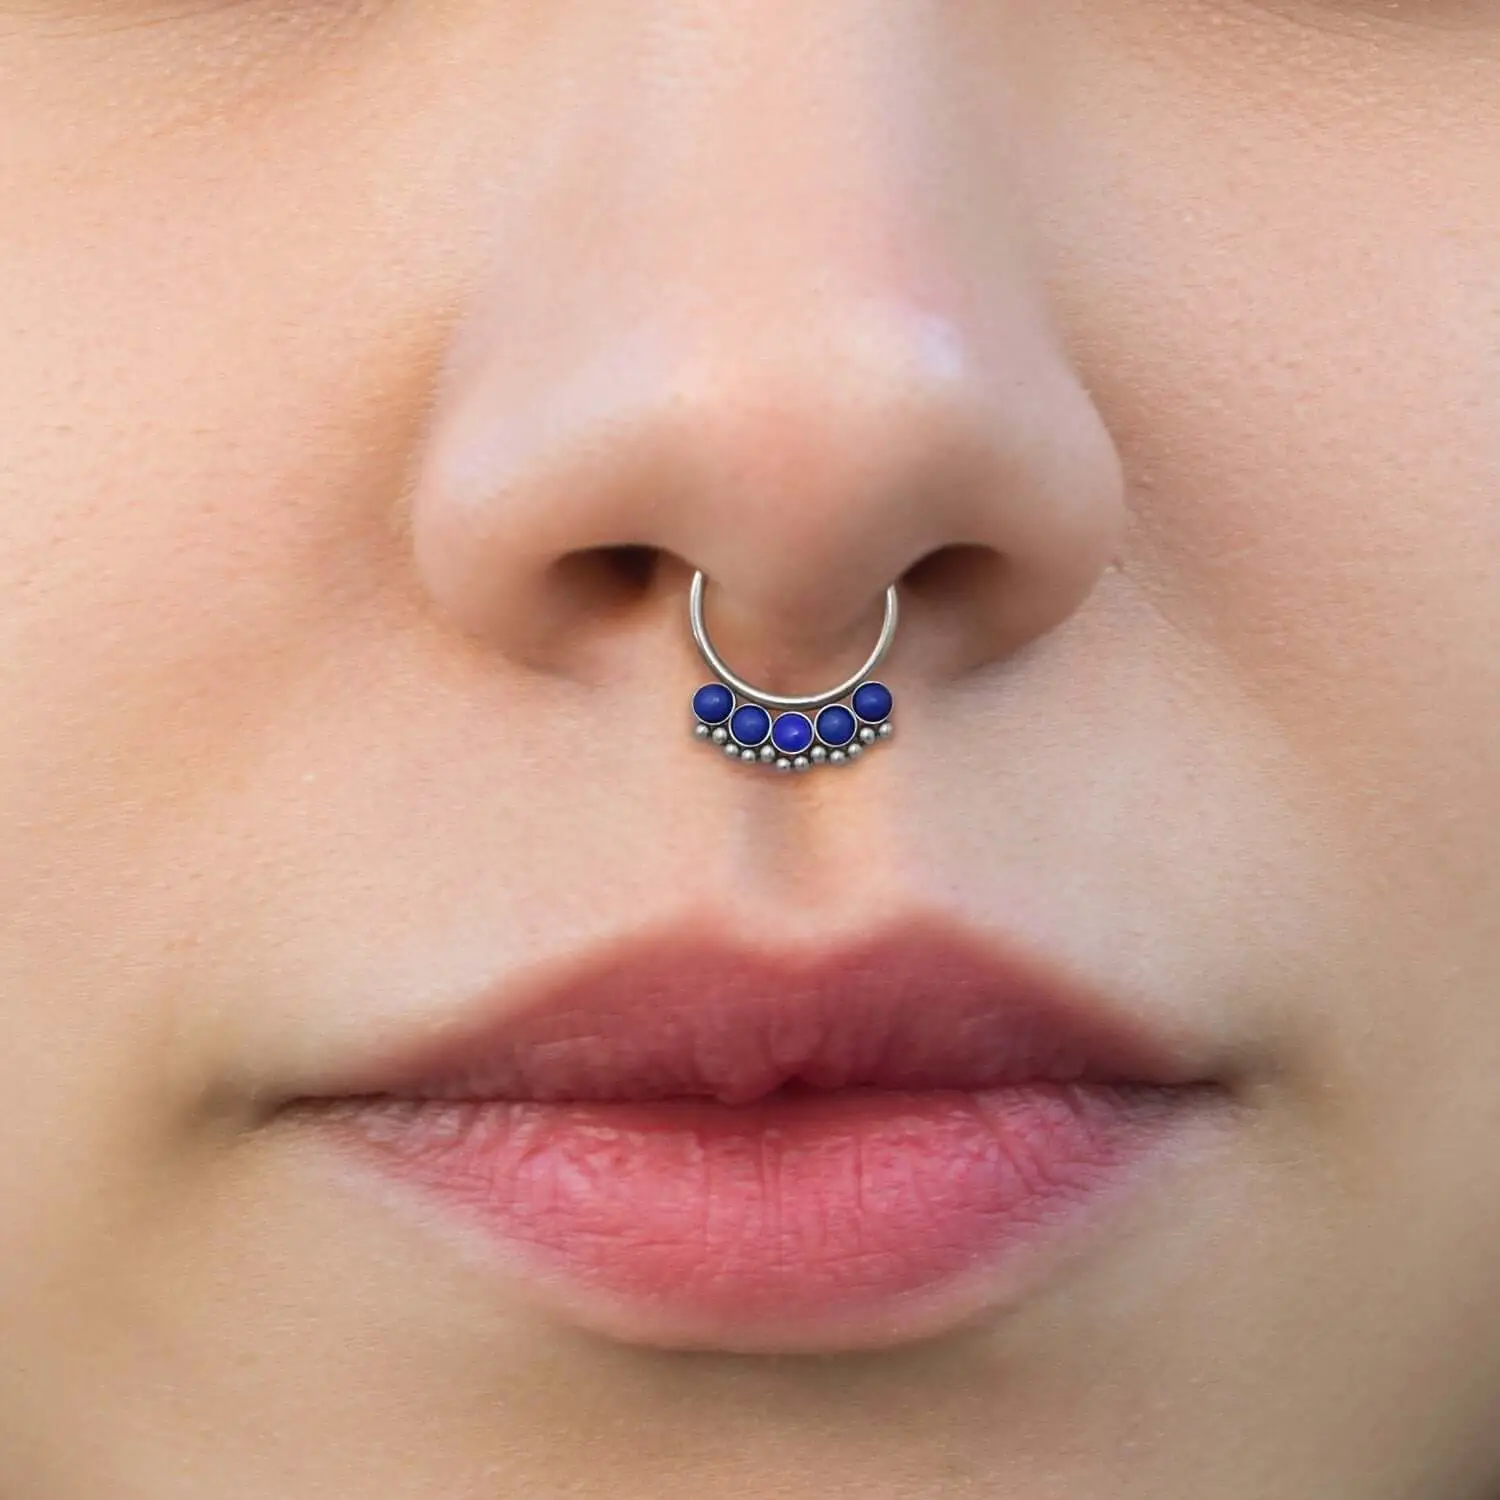 Nose Piercings Types, How To Clean, Care, And New Jewelry Ideas